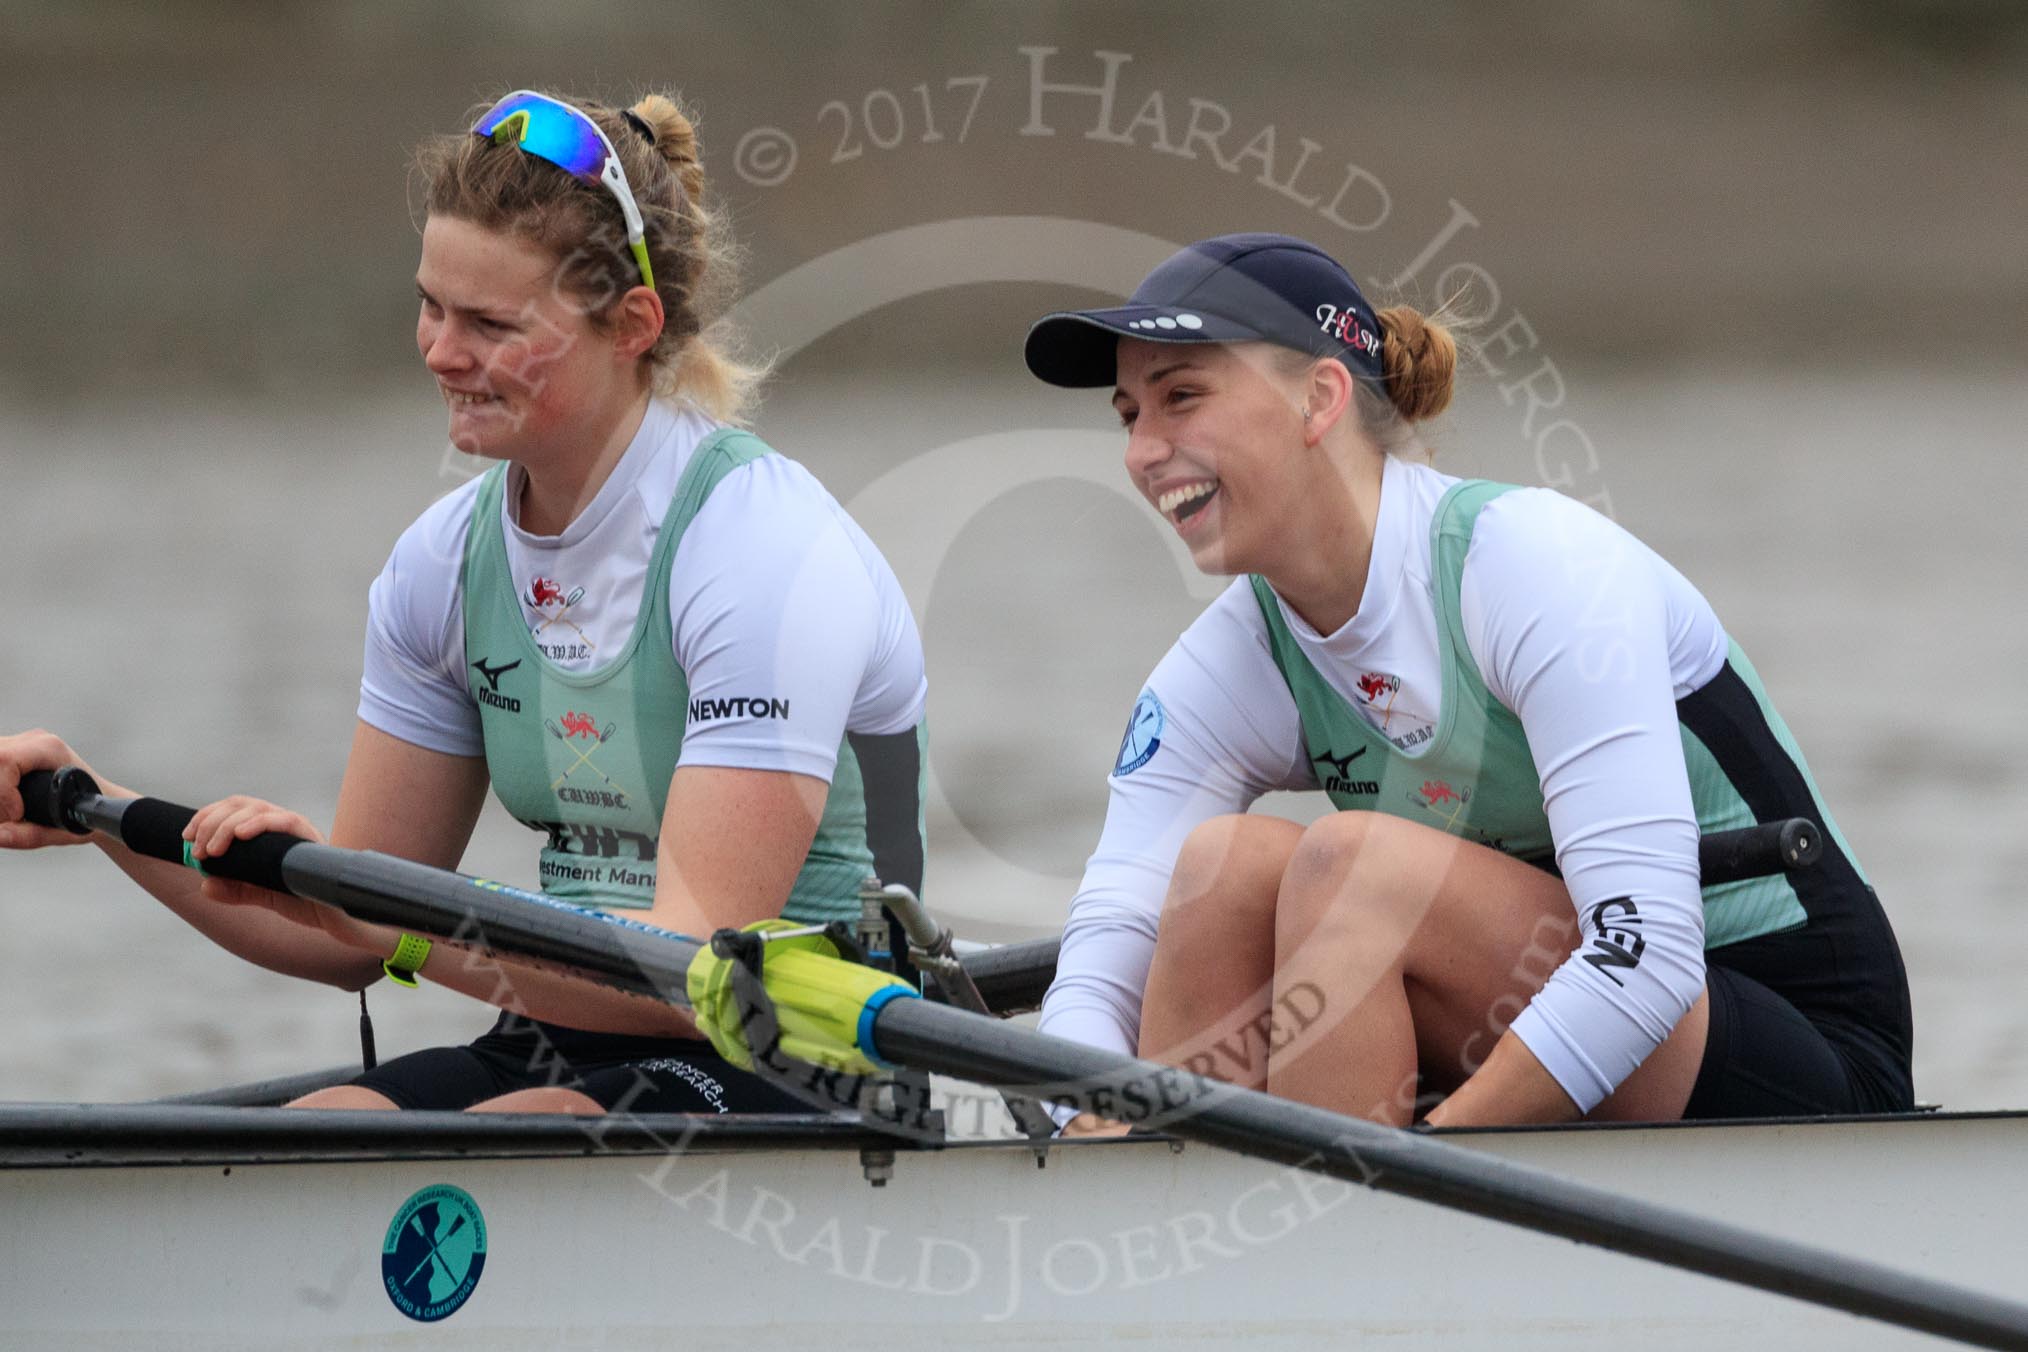 The Boat Race season 2018 - Women's Boat Race Trial Eights (CUWBC, Cambridge): Expecto Patronum; 3-Sally O Brien, 2-Millie Perrin.
River Thames between Putney Bridge and Mortlake,
London SW15,

United Kingdom,
on 05 December 2017 at 12:38, image #39